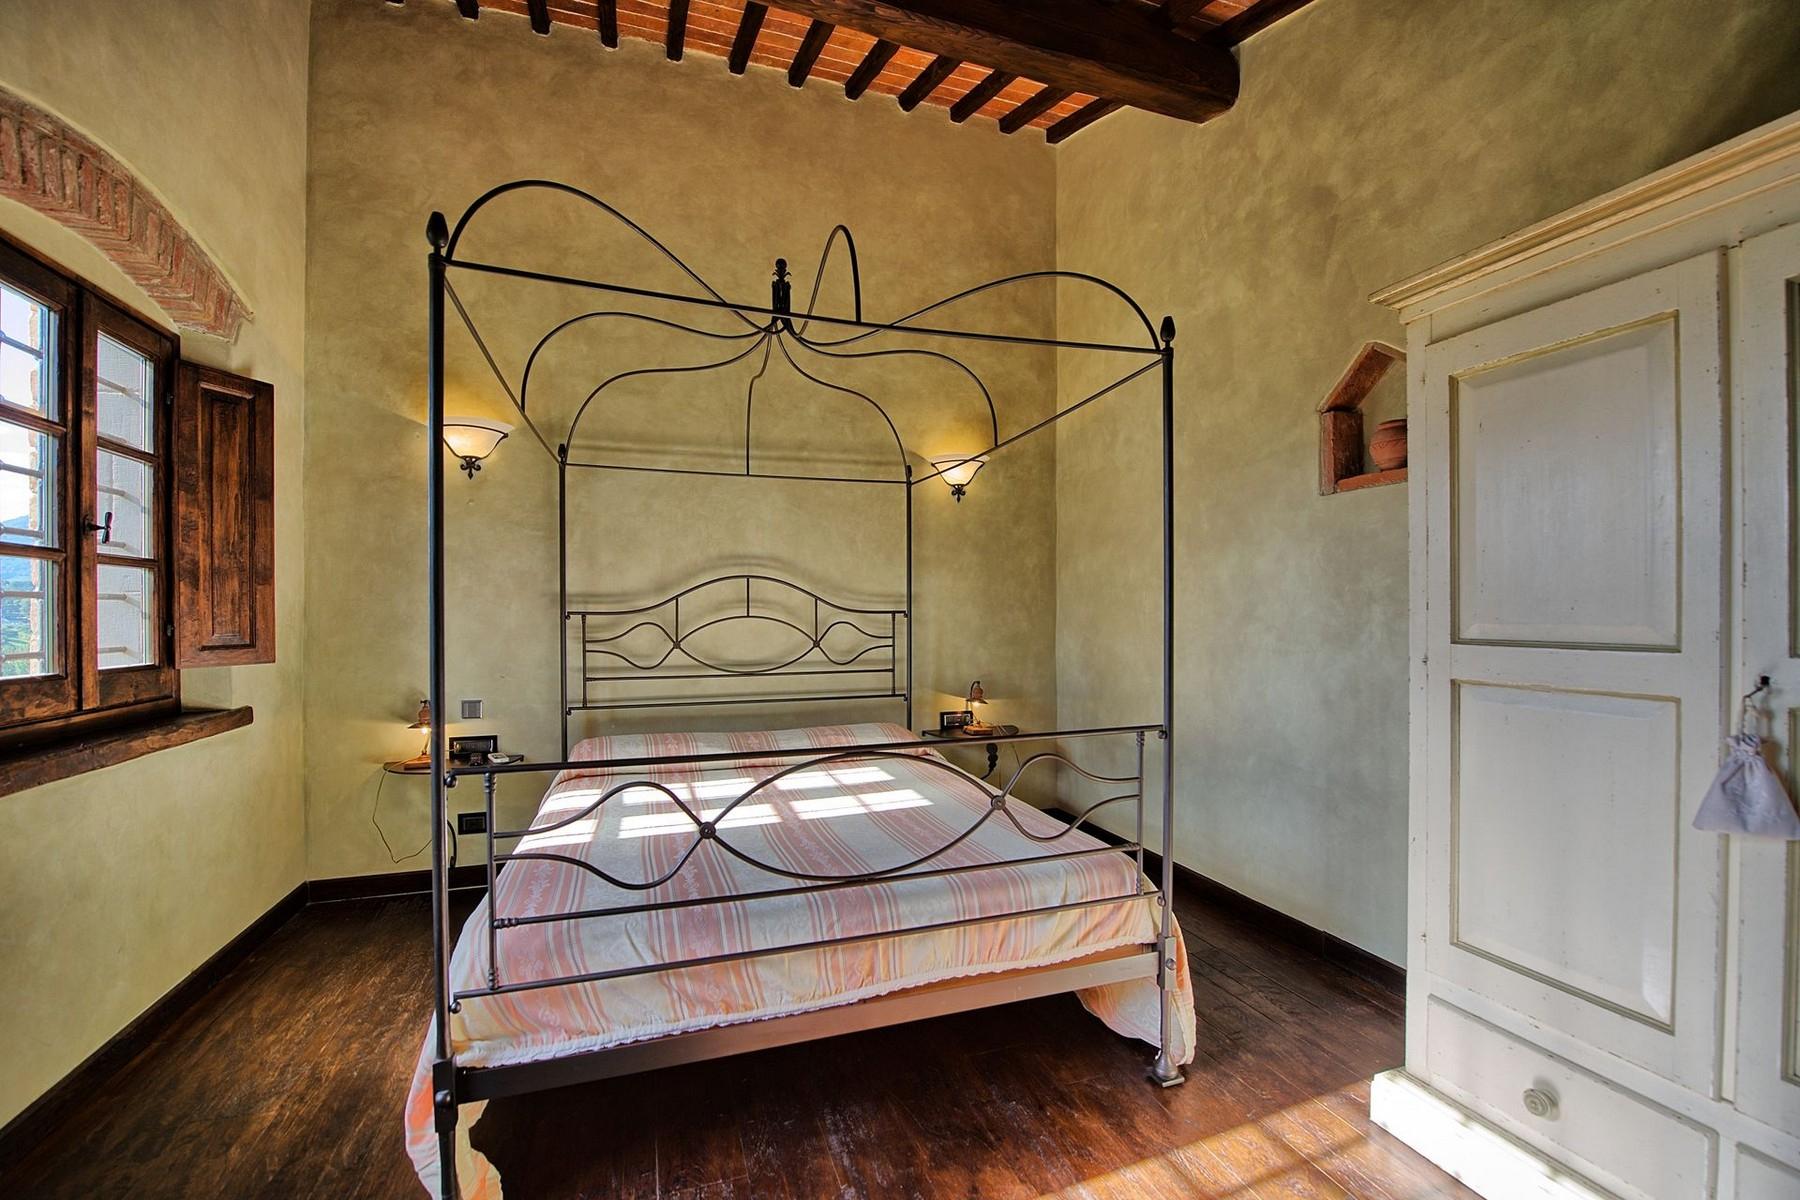 Farmhouse for sale in the Tuscan hills - 13